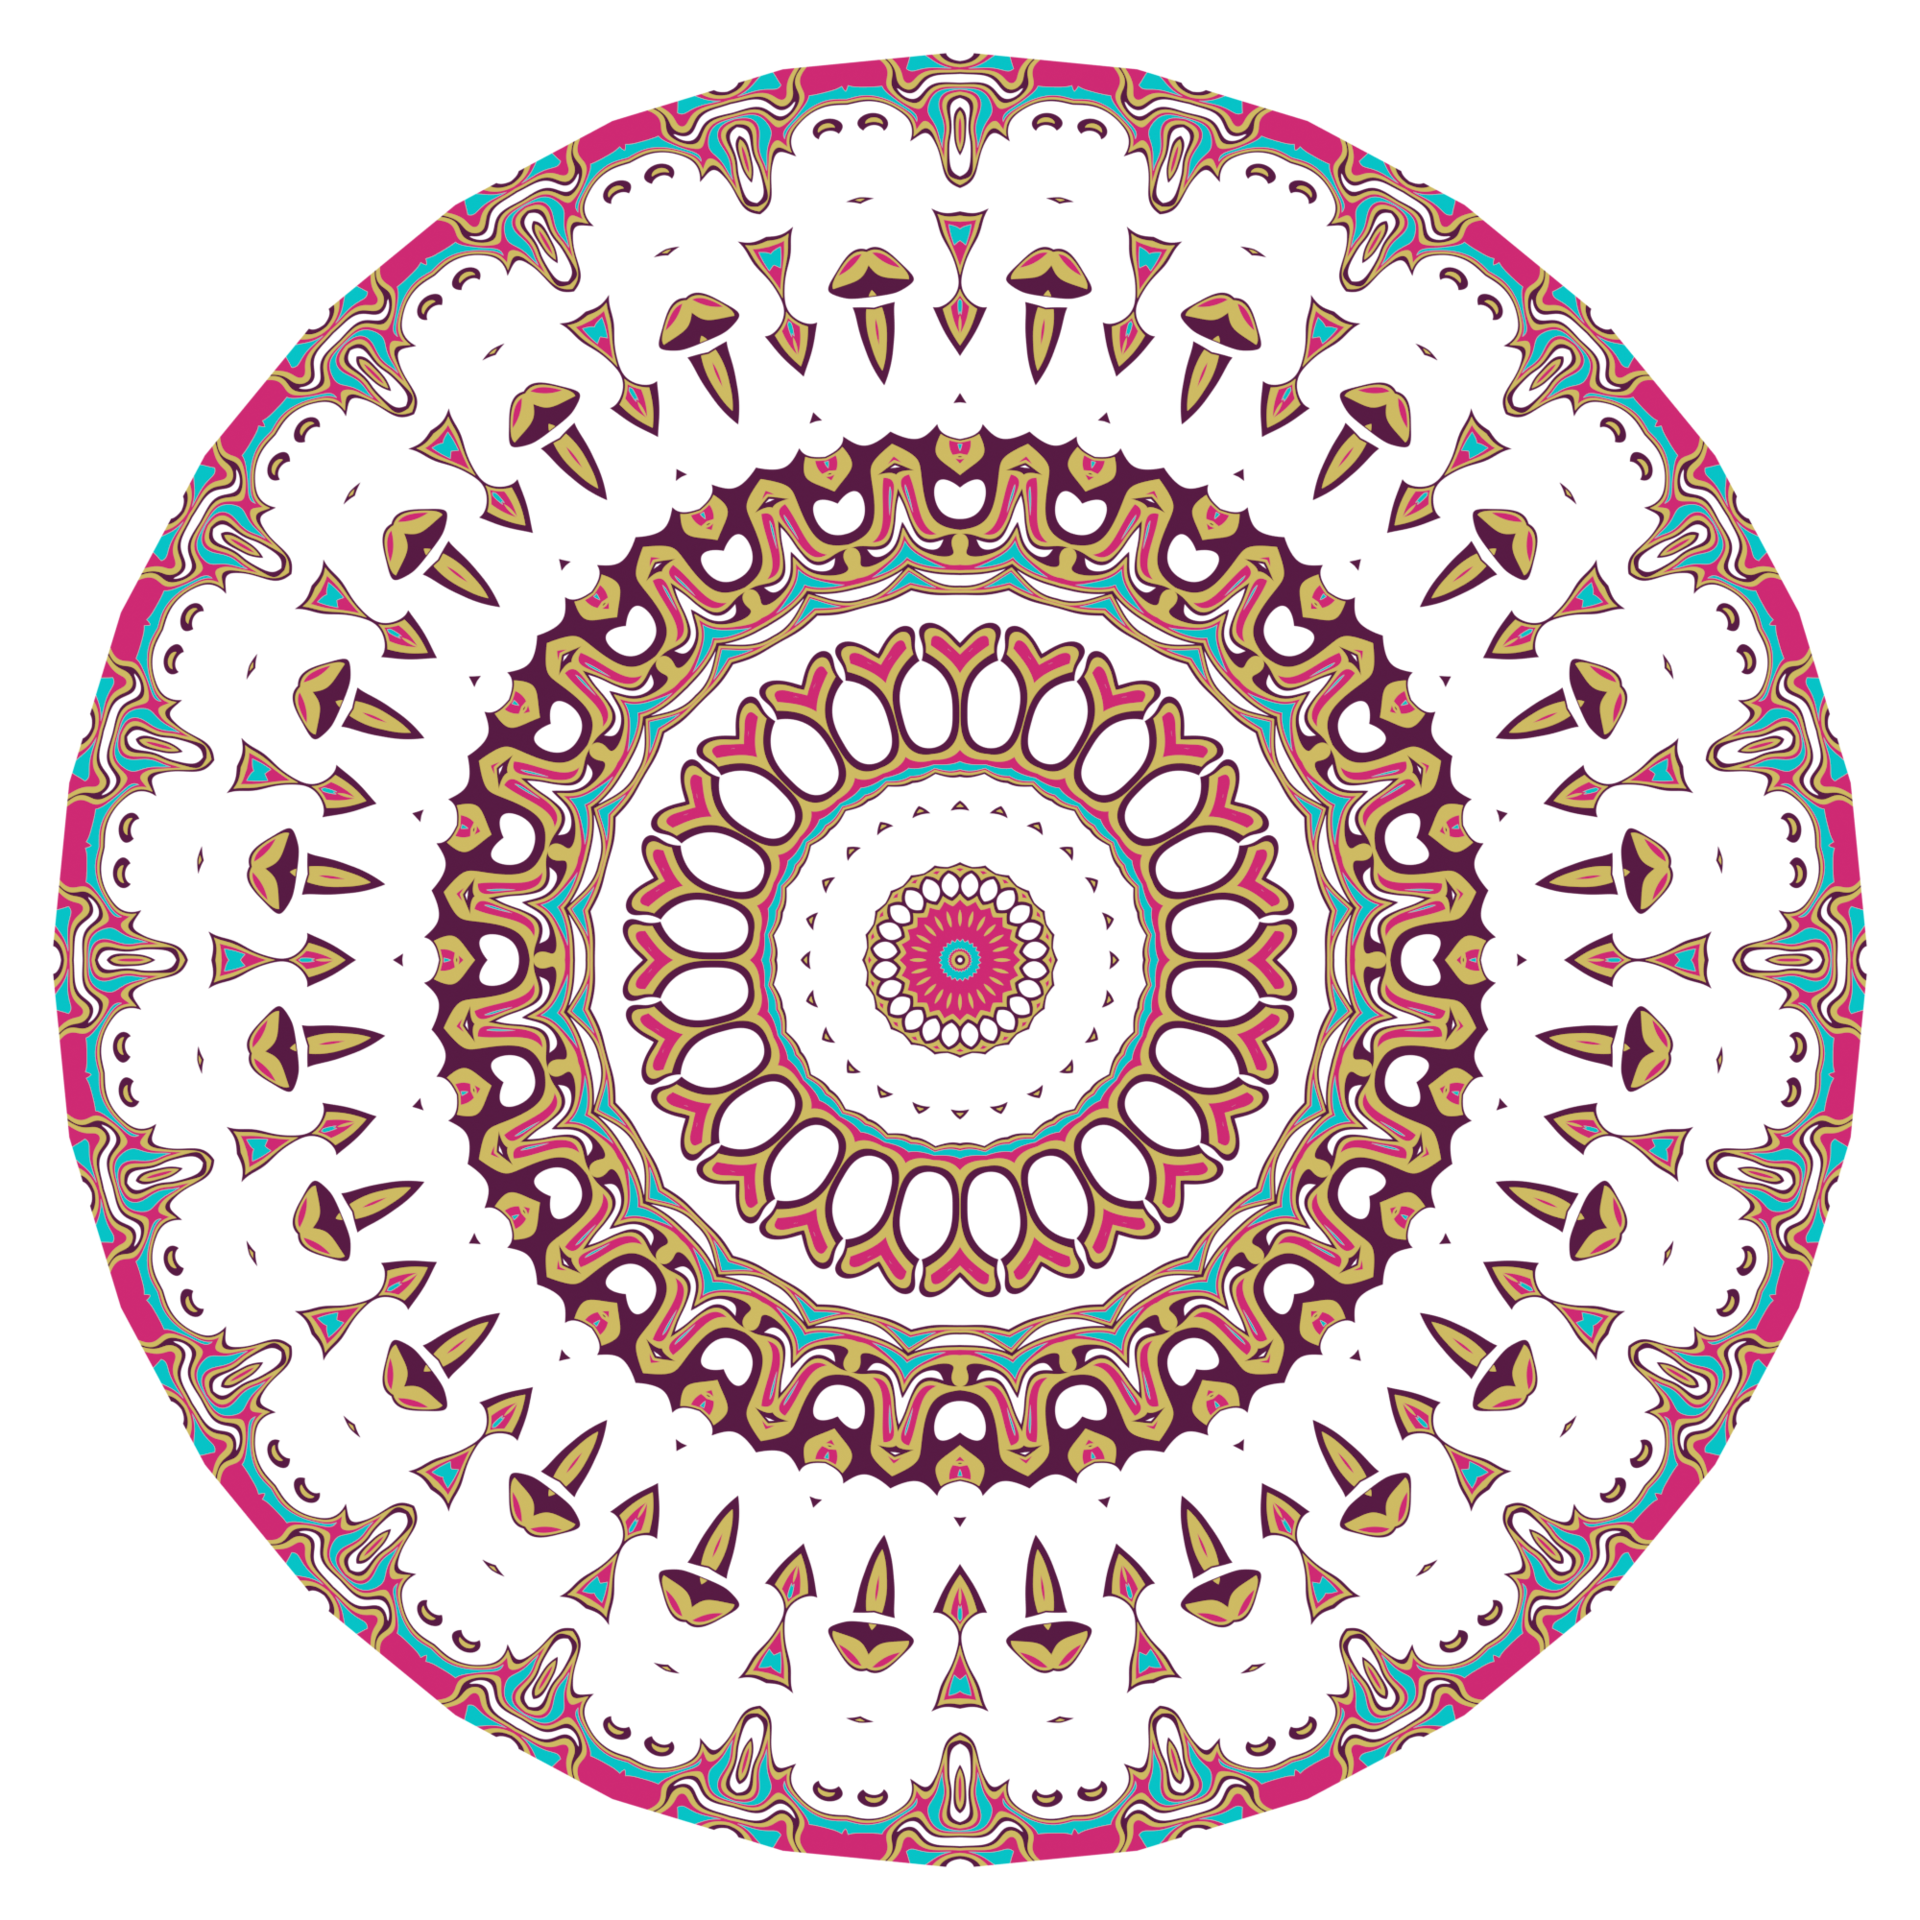 Mandala PNG Free Images with Transparent Background - (7,091 Free Downloads)